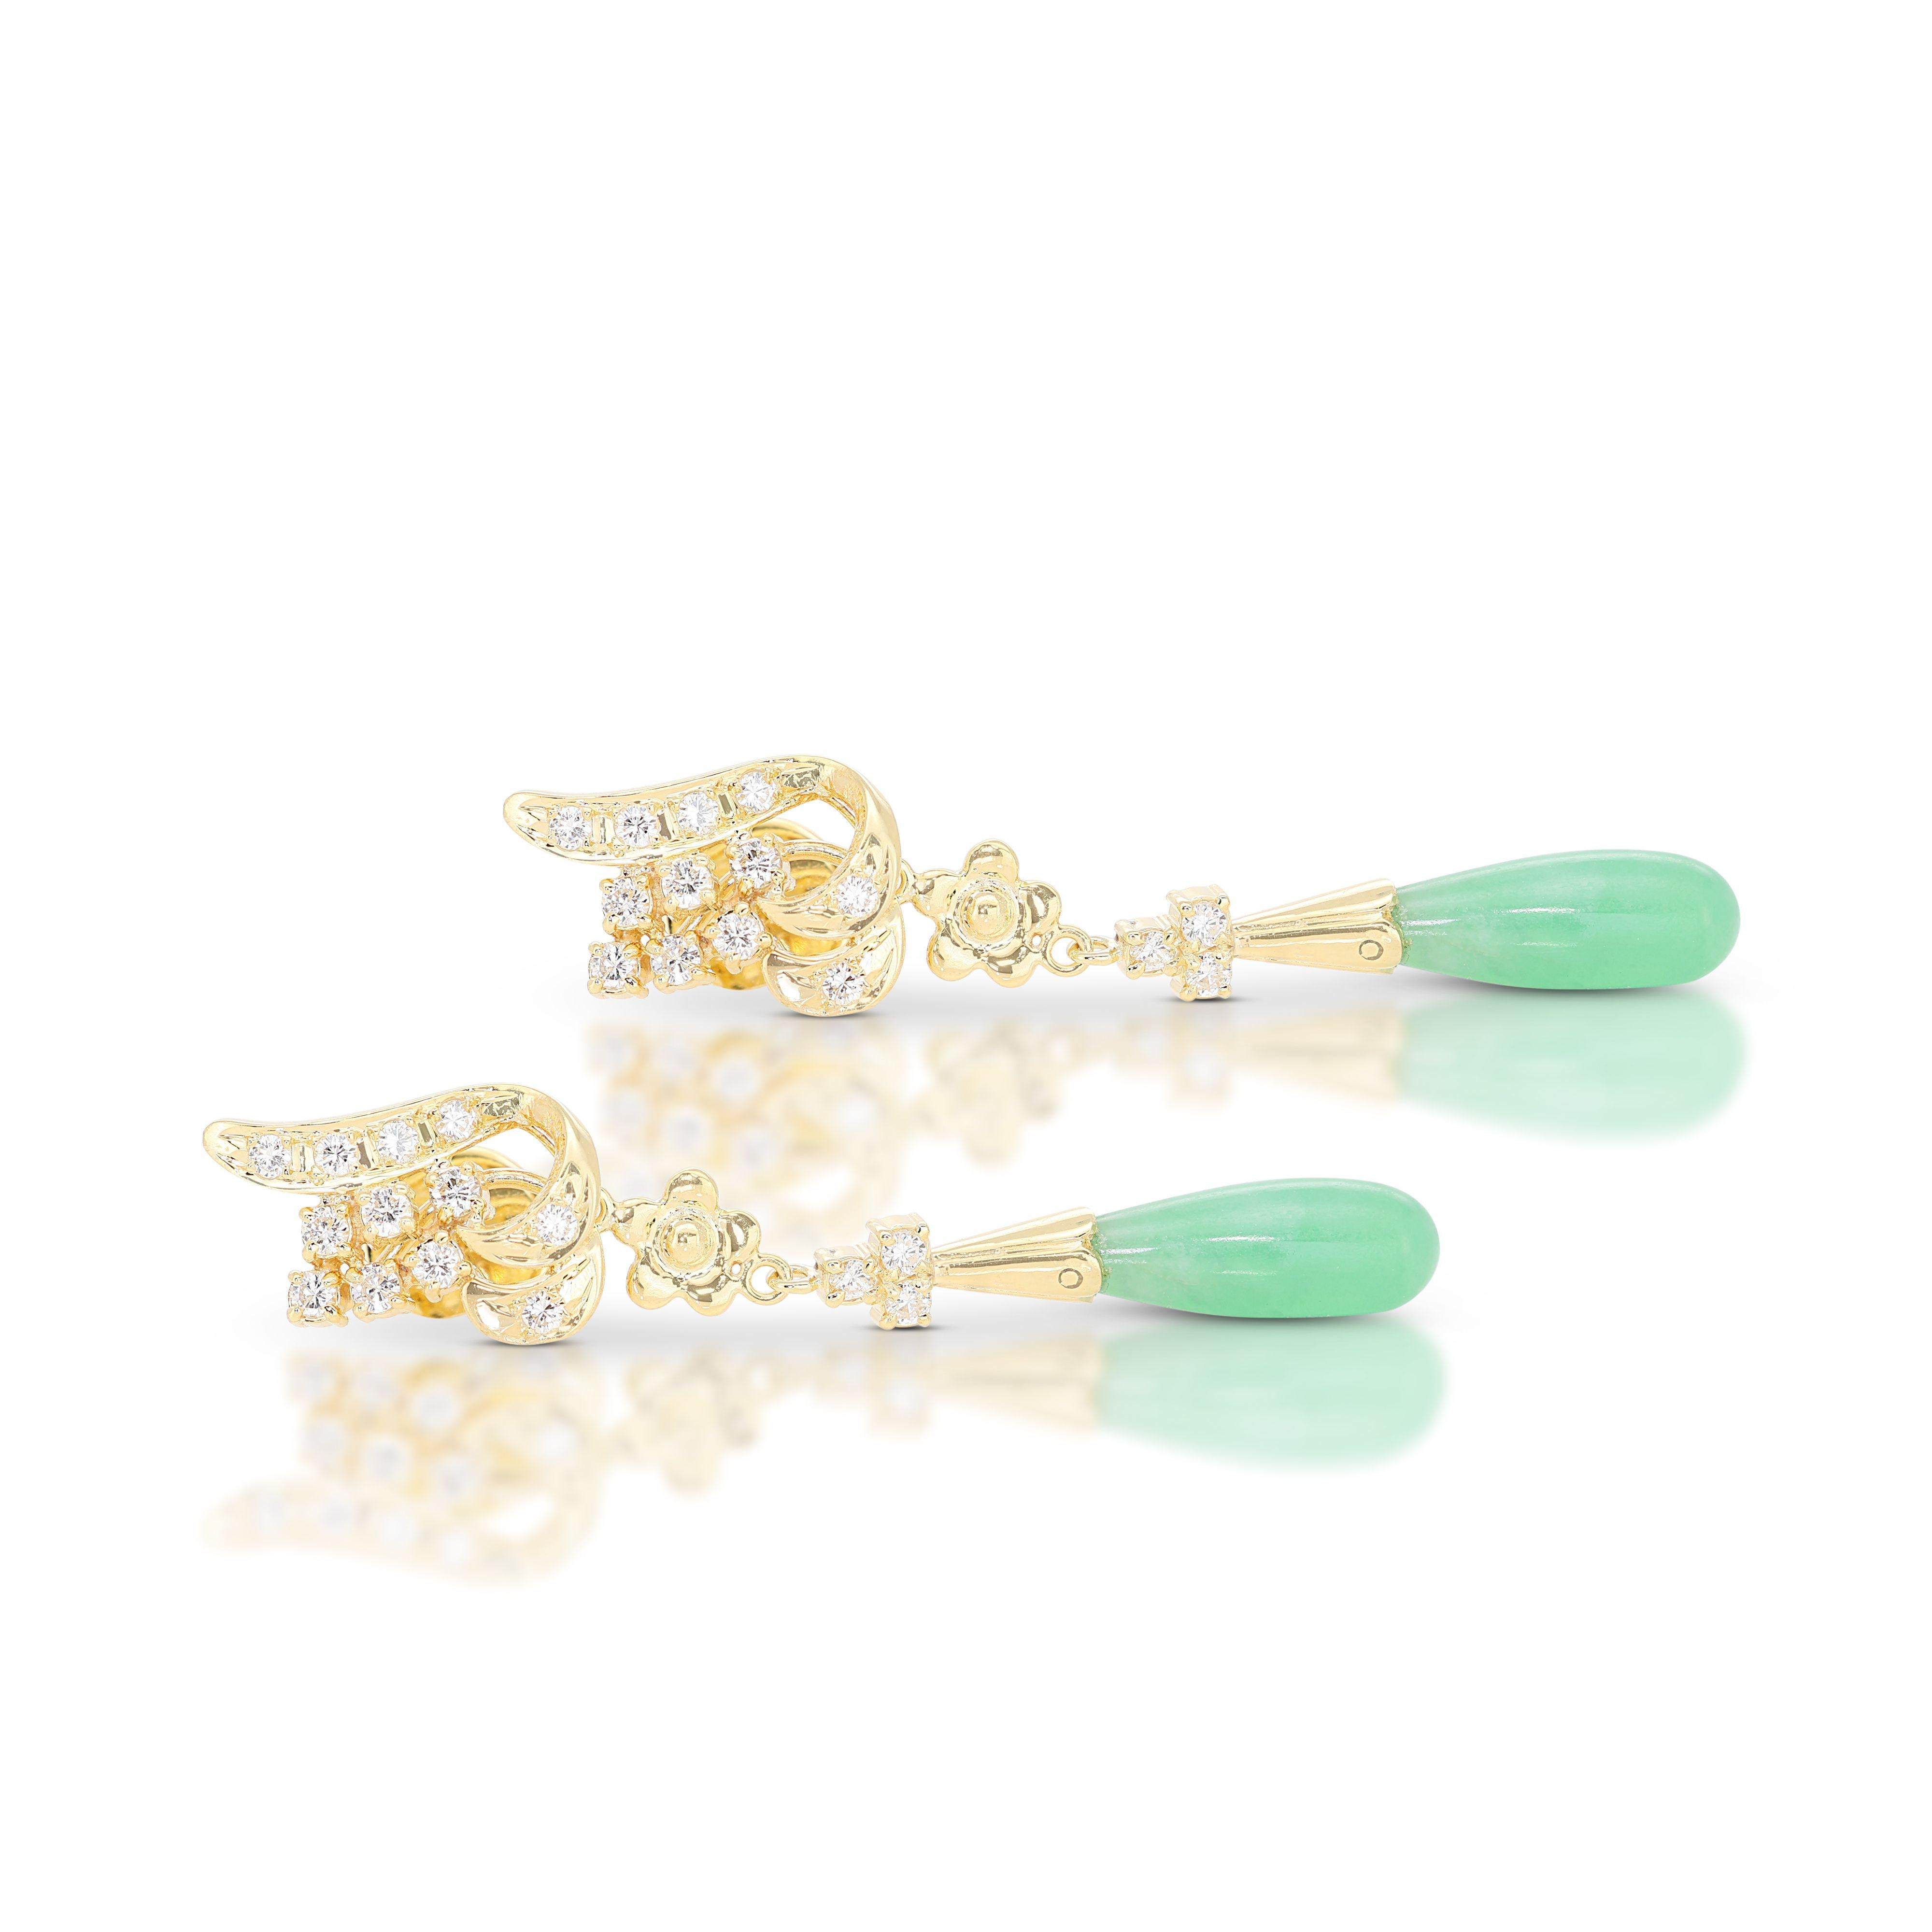 Stunning Jade and Diamond Drop Earrings in 14K Yellow Gold In New Condition For Sale In רמת גן, IL